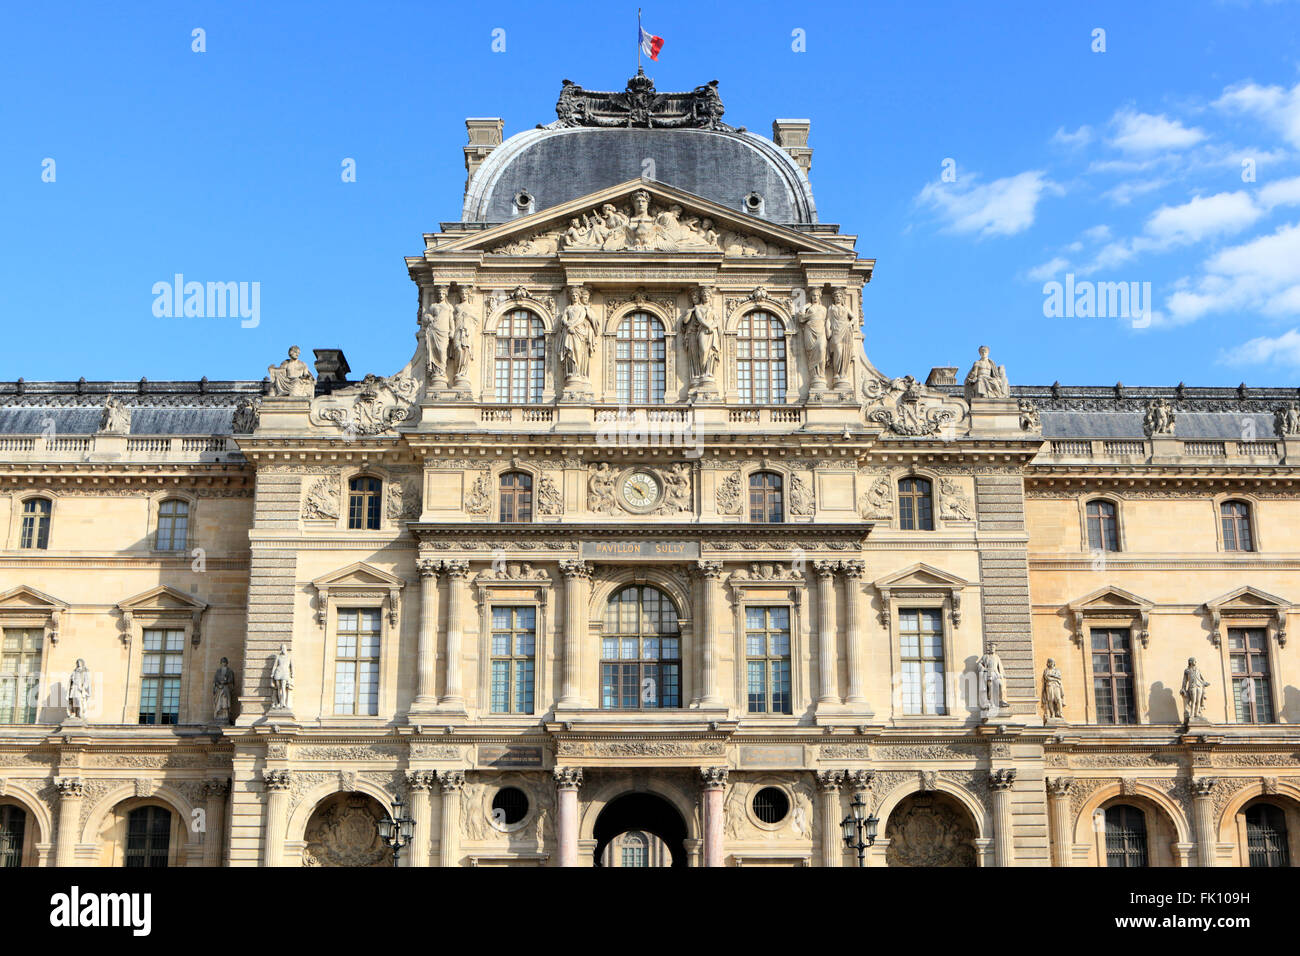 Renaissance architecture at the Louvre Museum in Paris bathed in warm late afternoon light. Stock Photo